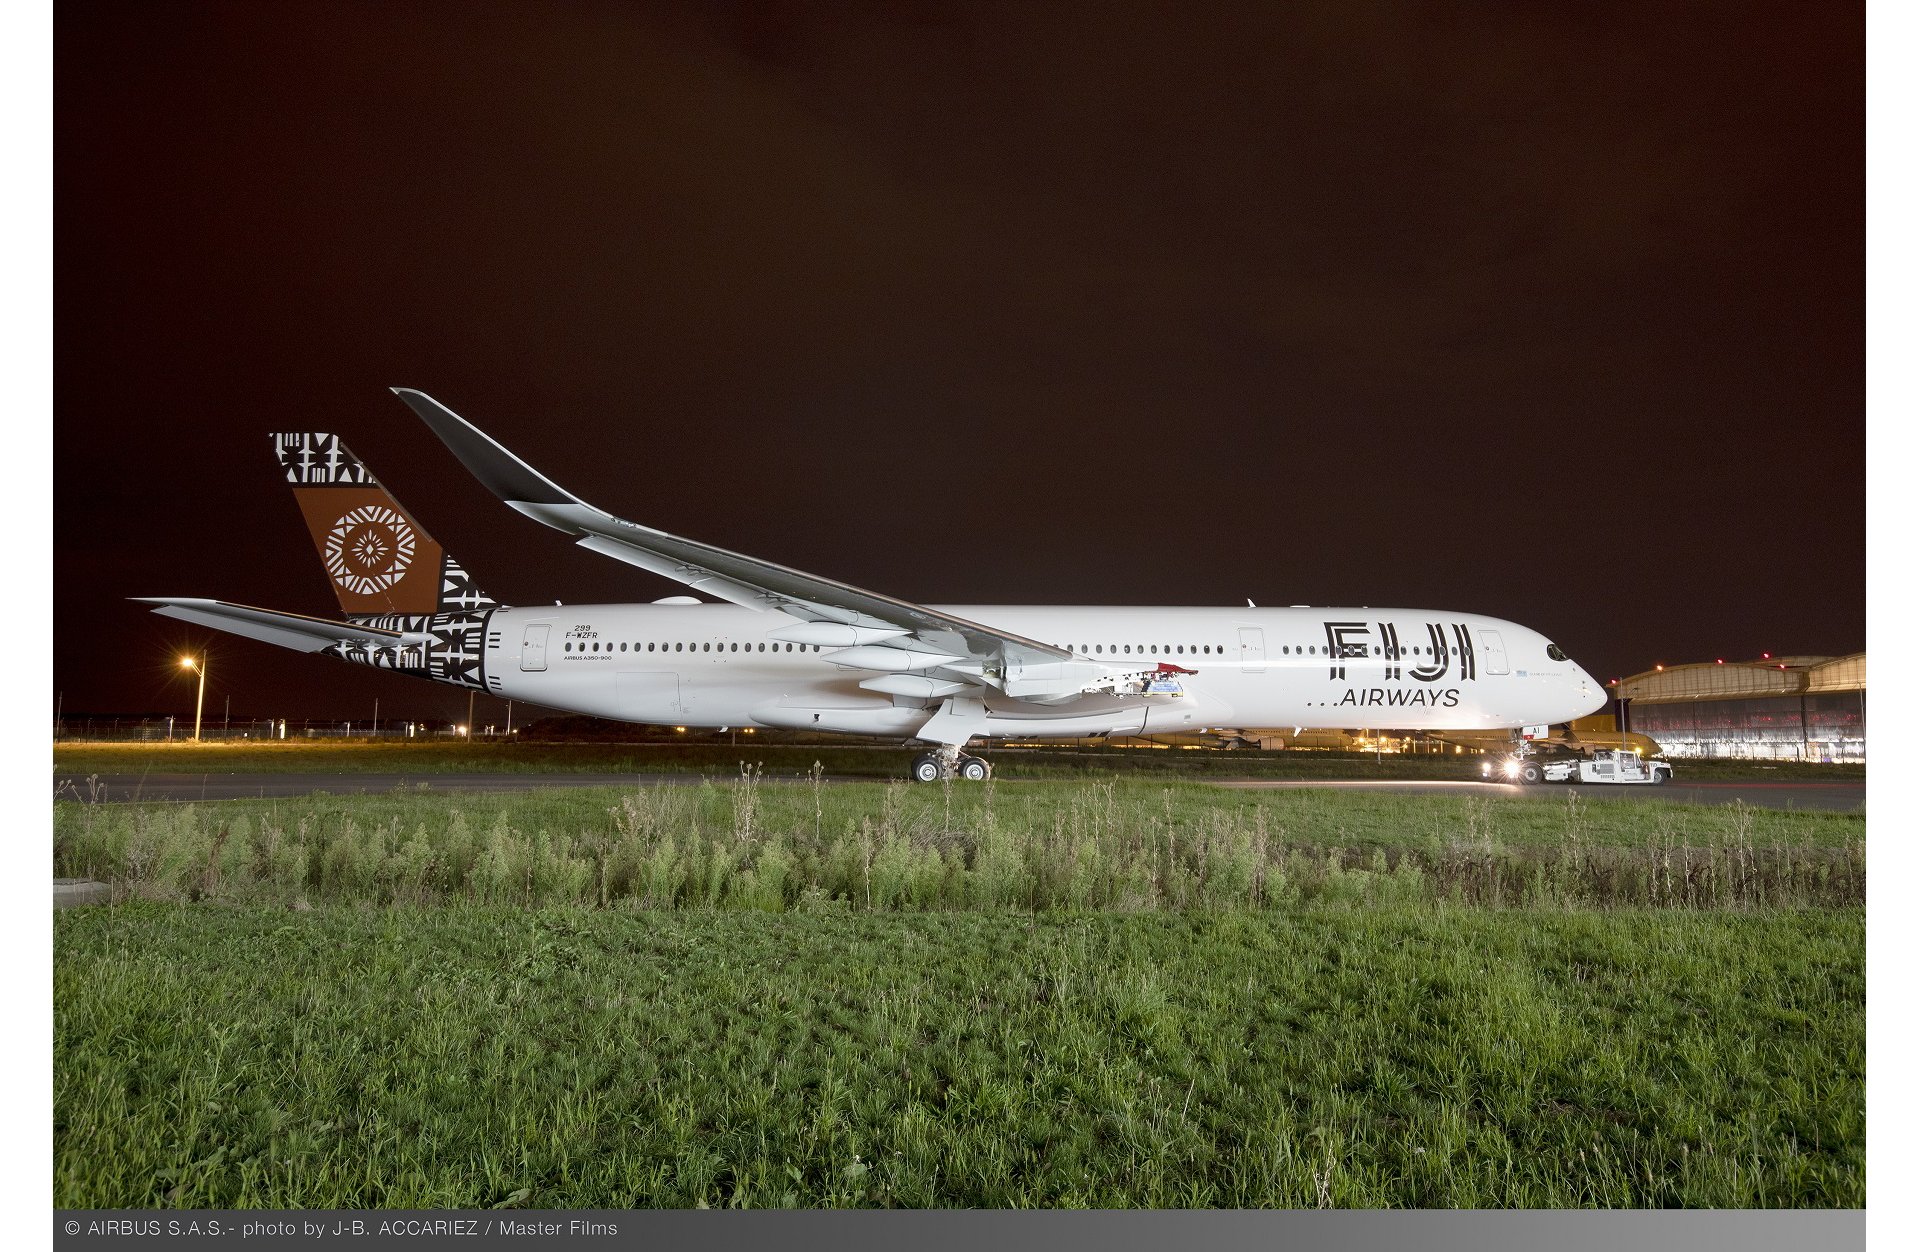 Airbus A350XWB (partie 3) - Page 23 A350-900-Fiji-Airways-MSN299-rolls-out-of-paint-shop-006